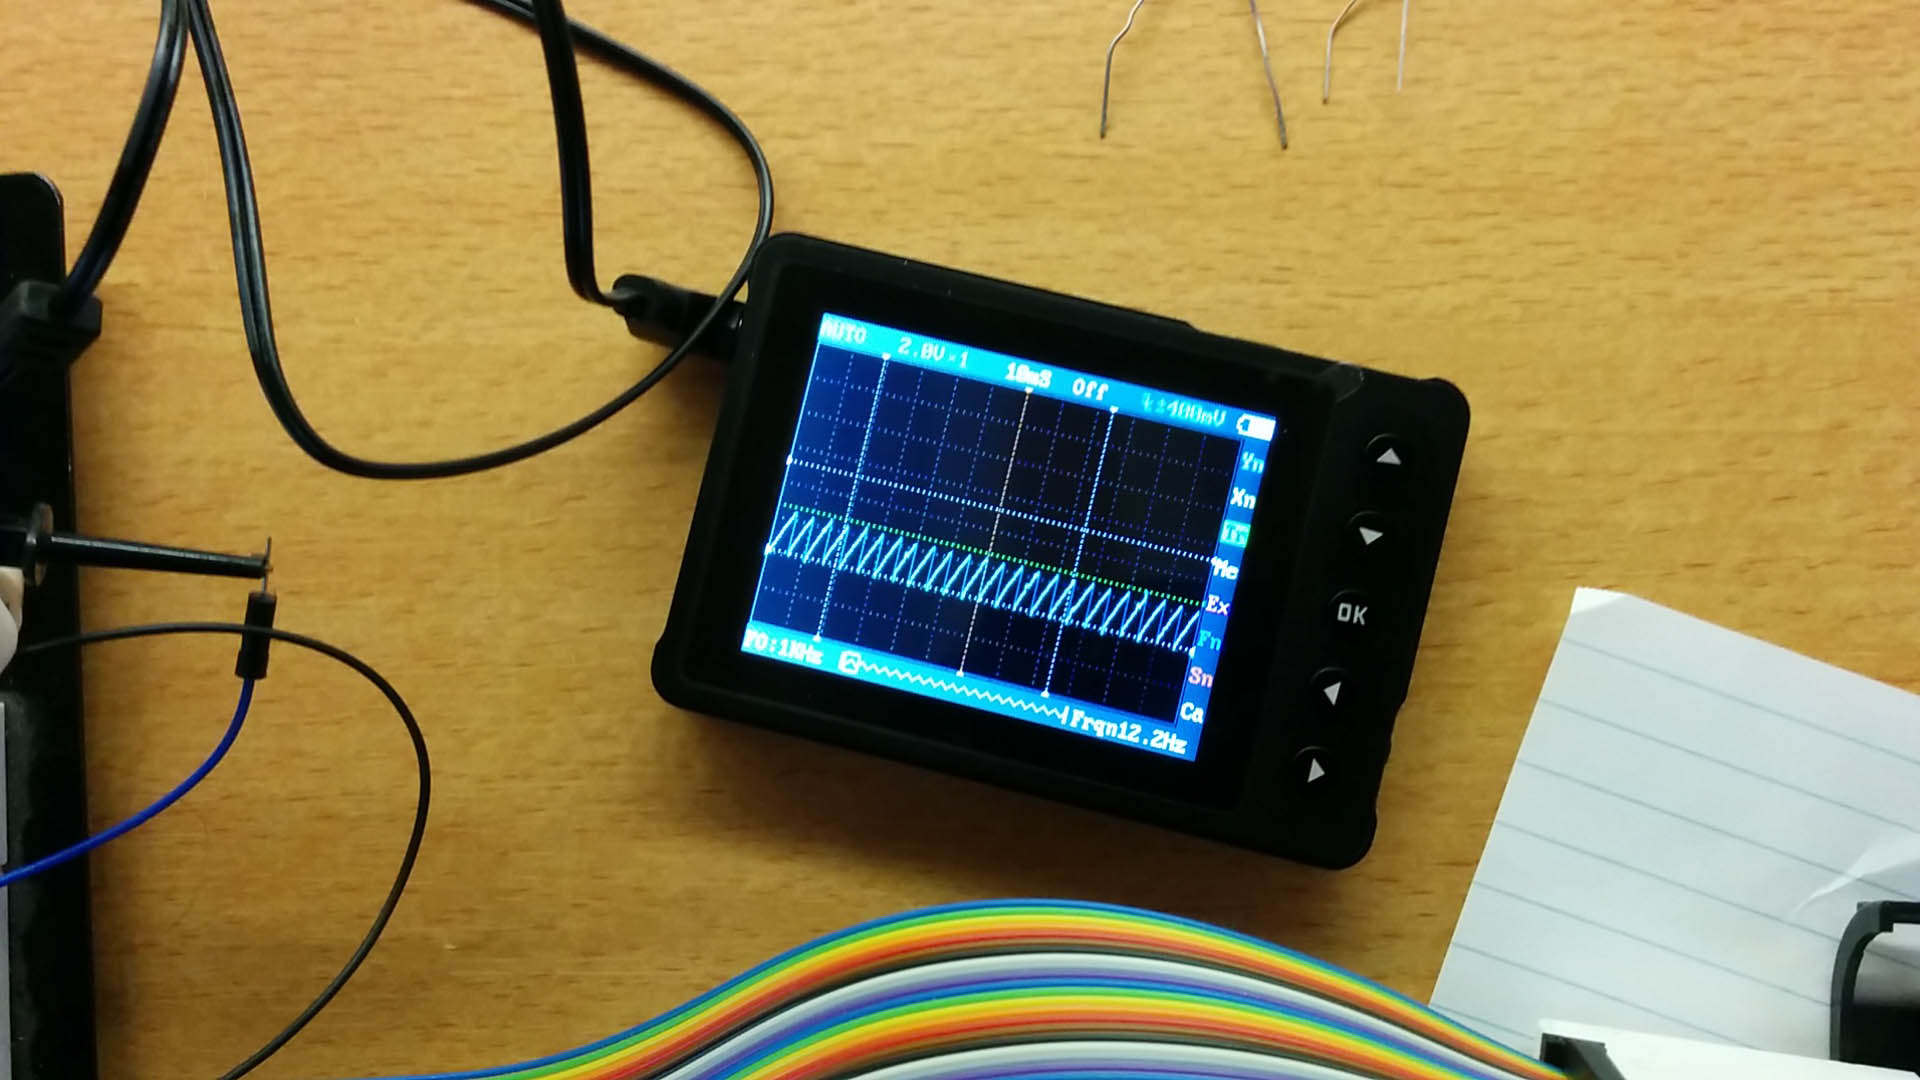 The oscilloscope showing the capacitor charging and discharging as the nozzles are being tested one by one.